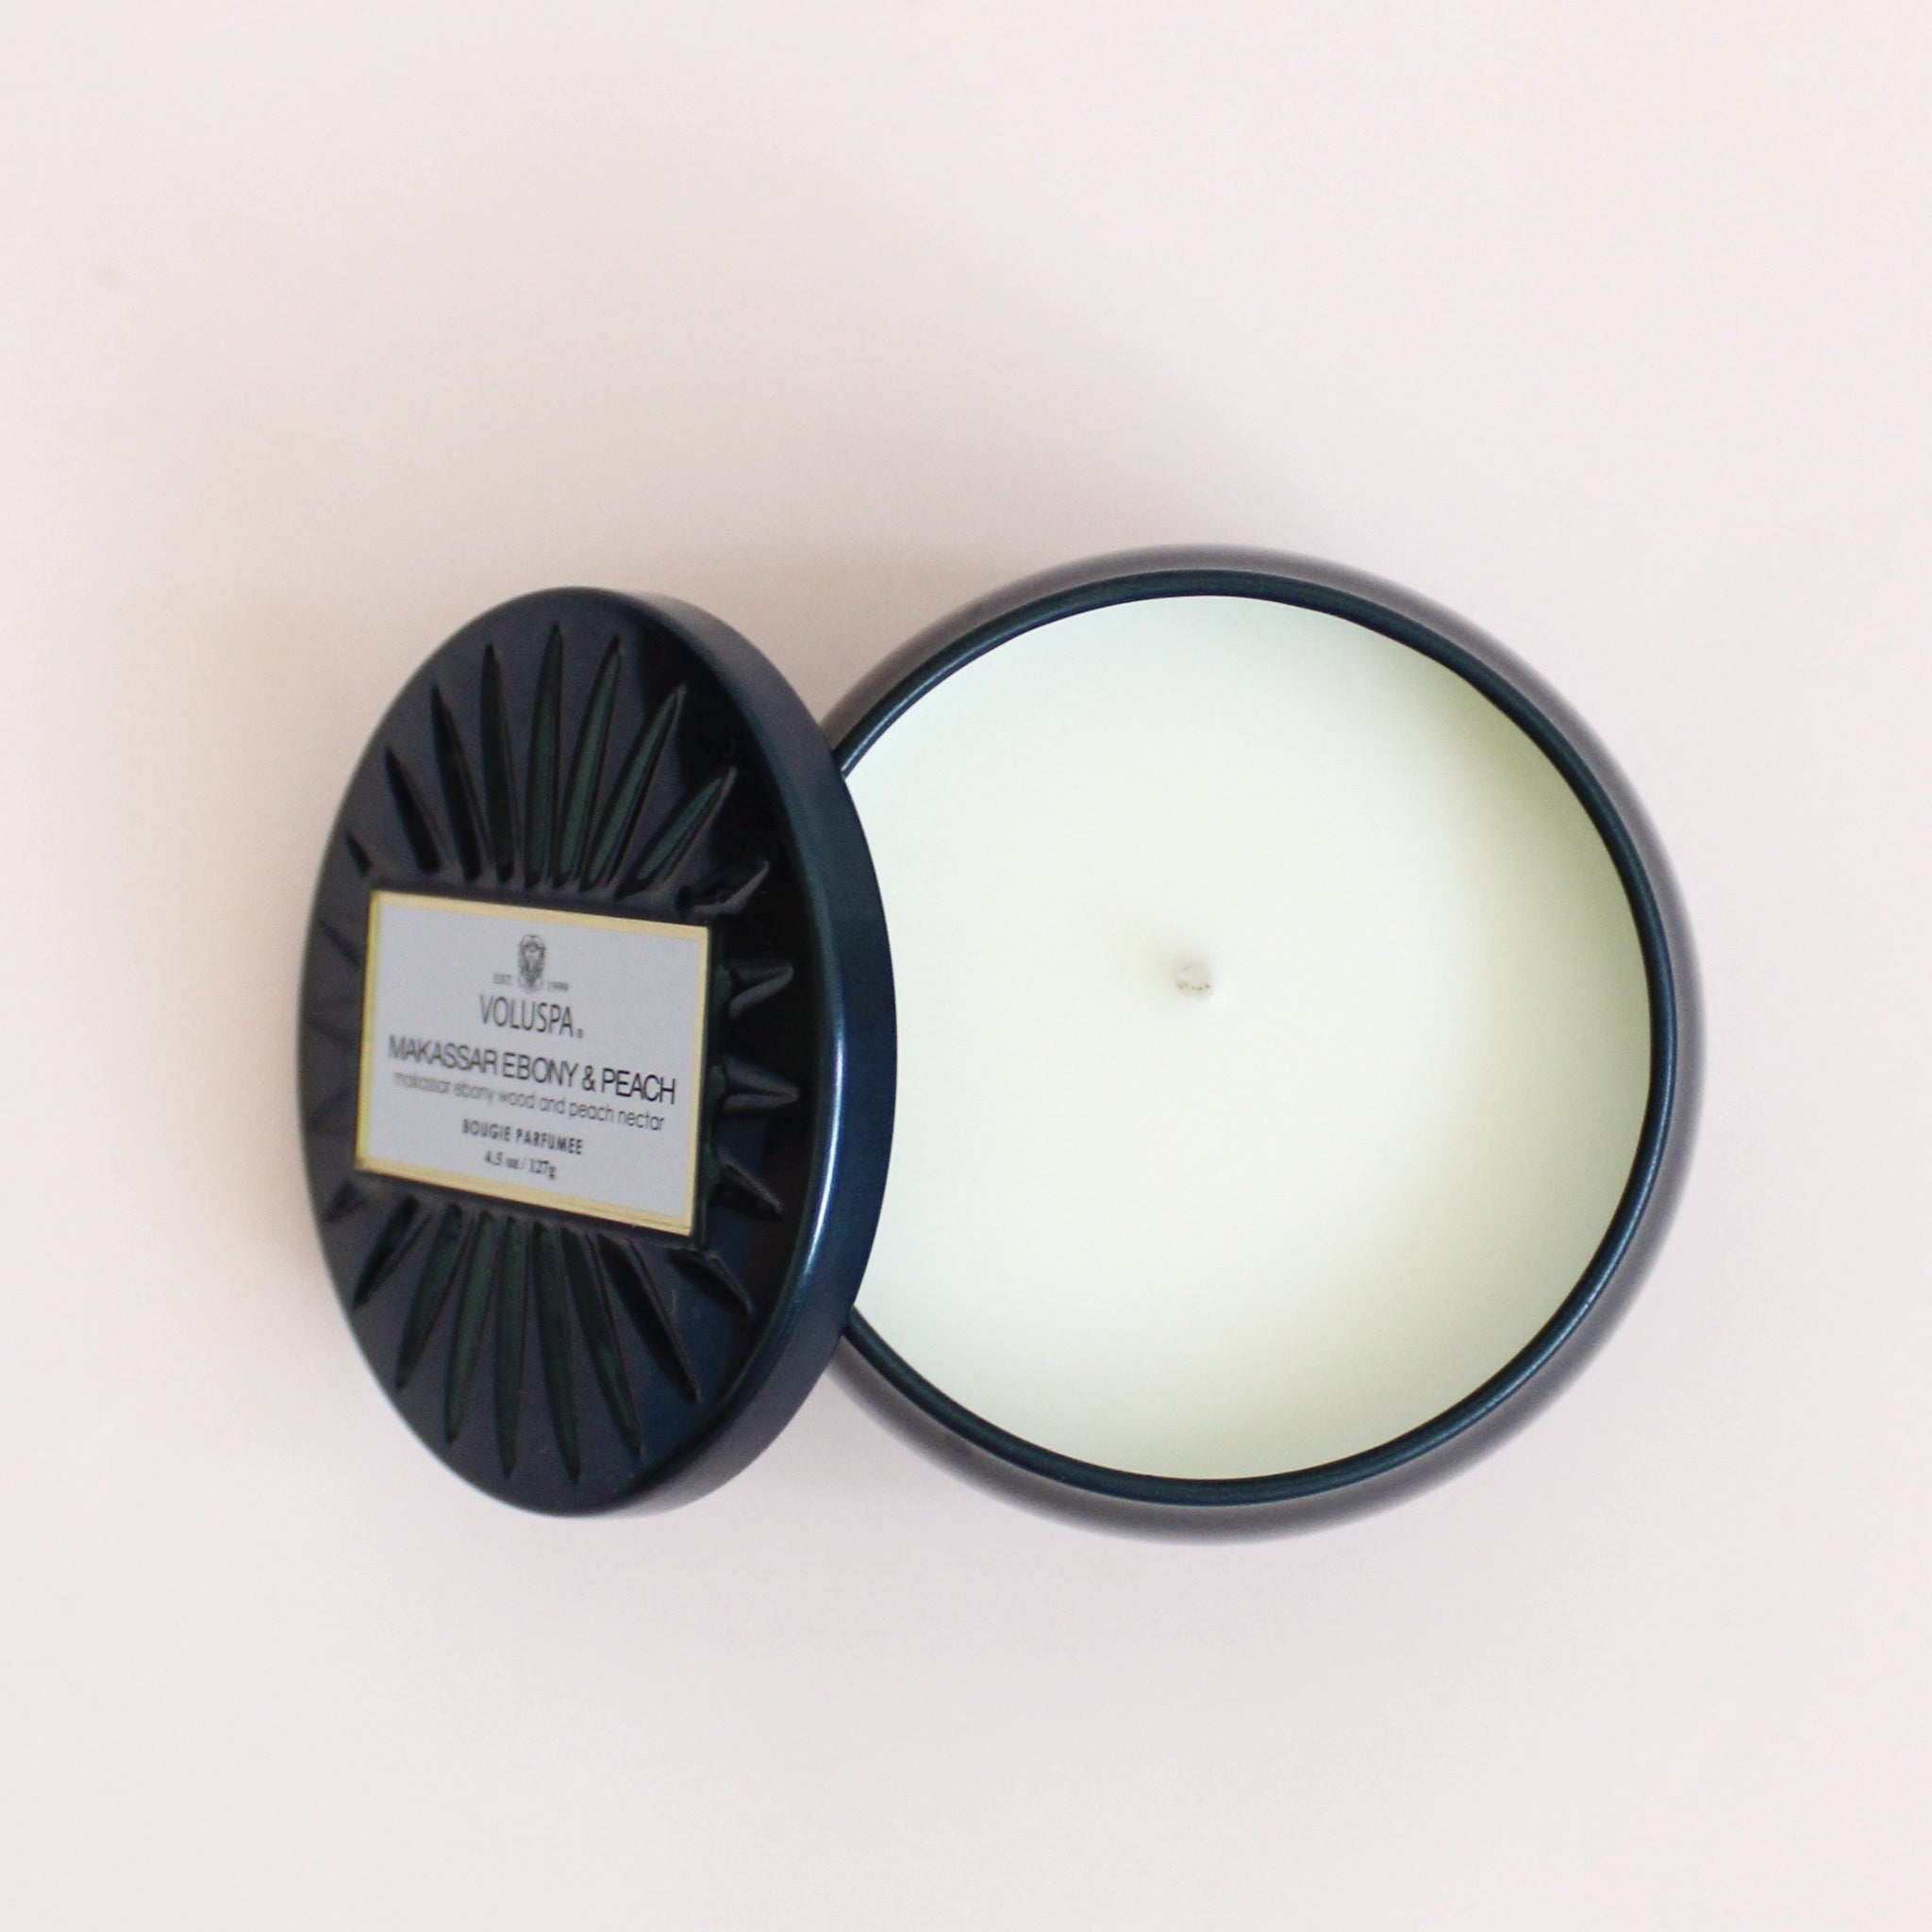 On a cream background is a round tin single wick candle in a navy blue shade along with a label on the lid that reads, "Voluspa Makassar Ebony & Peach".